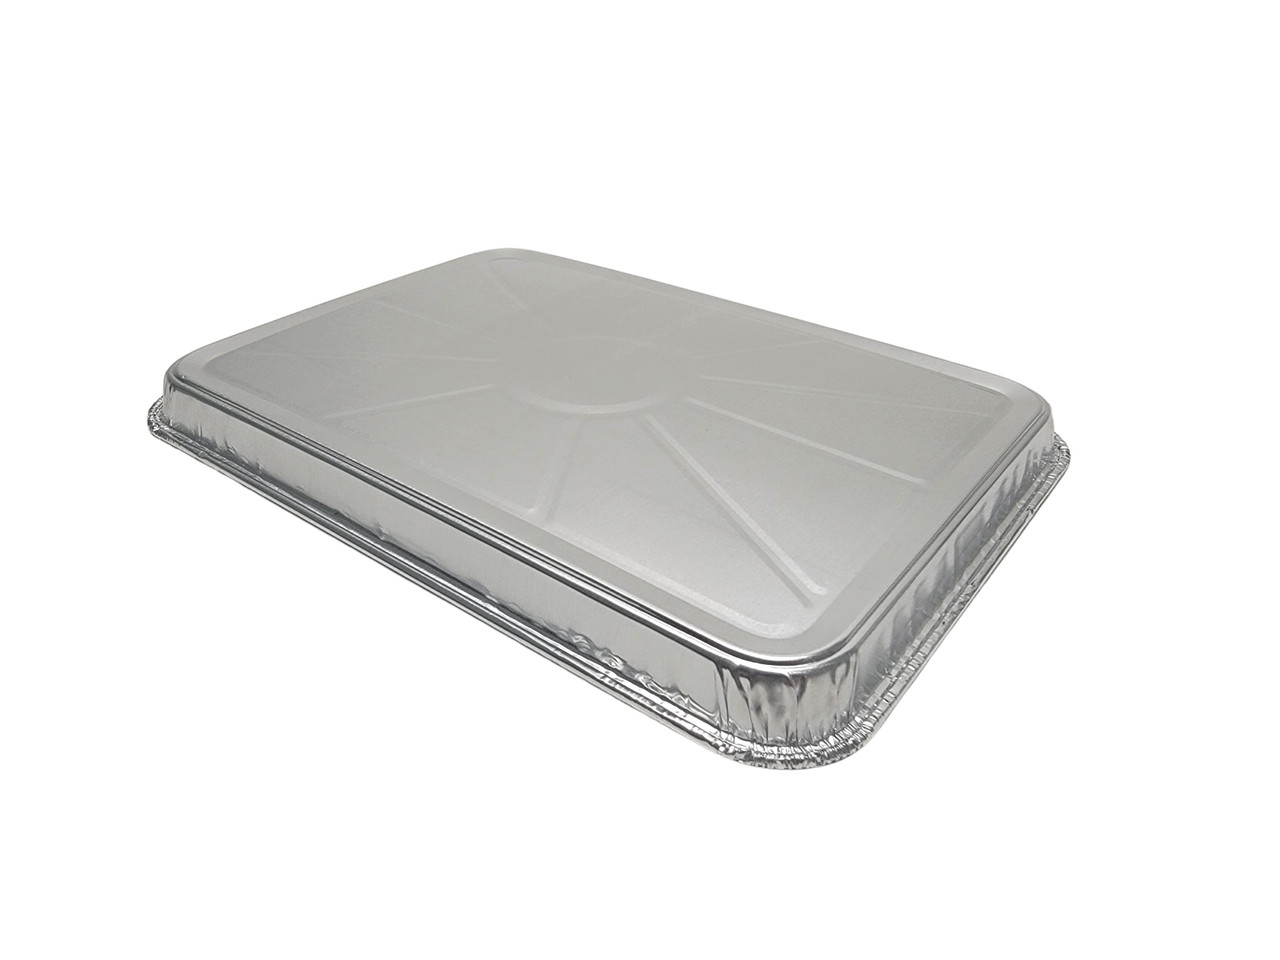 Disposable Aluminum Foil Toaster Oven Tray or Danish Pan #3300